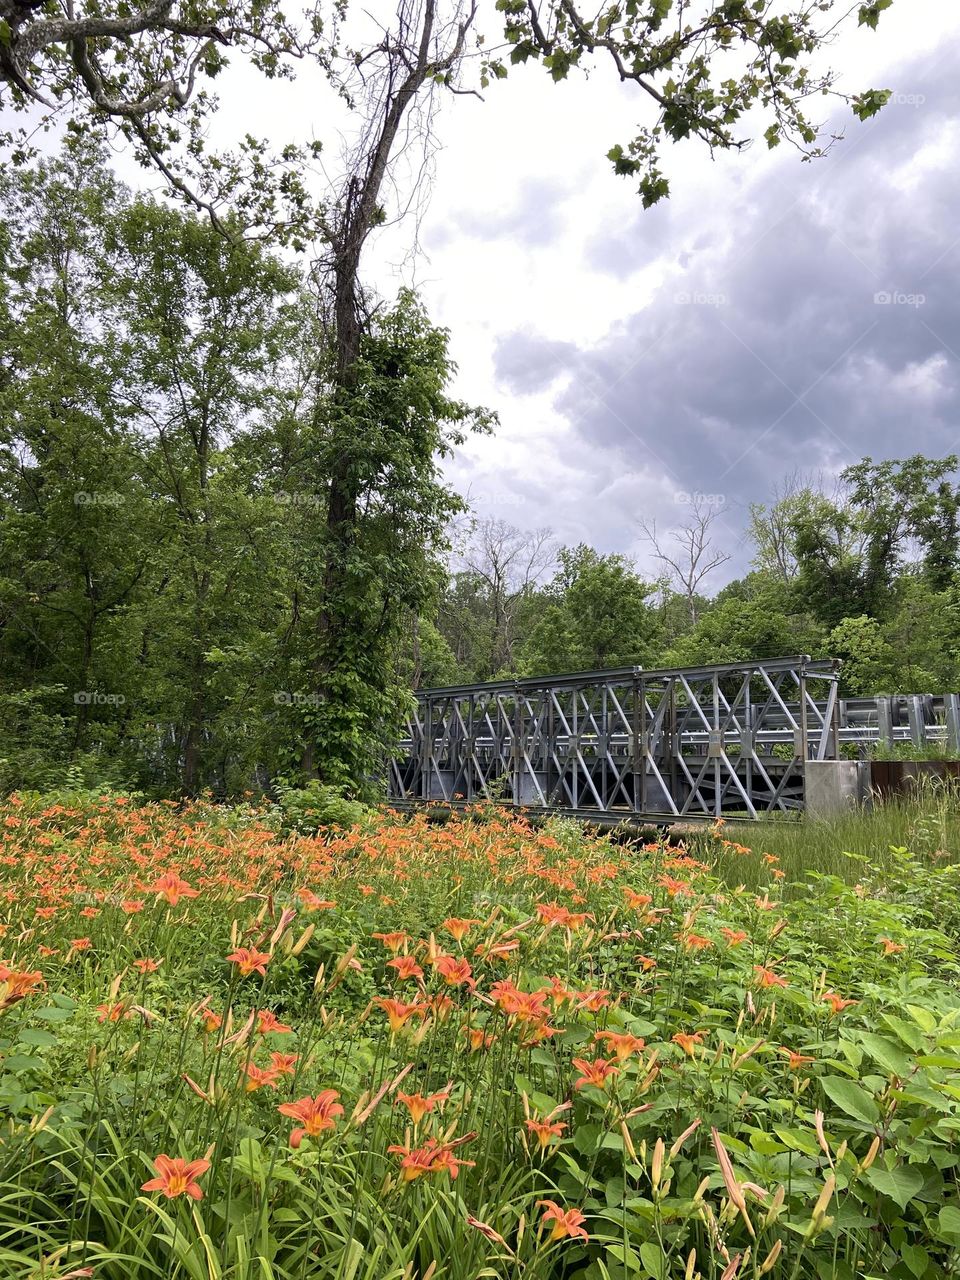 A field of green accented by bright orange day-lilies. Taken at Historic Walnford, a park and historic preservation site in Allentown, NJ, just before a rainstorm. 